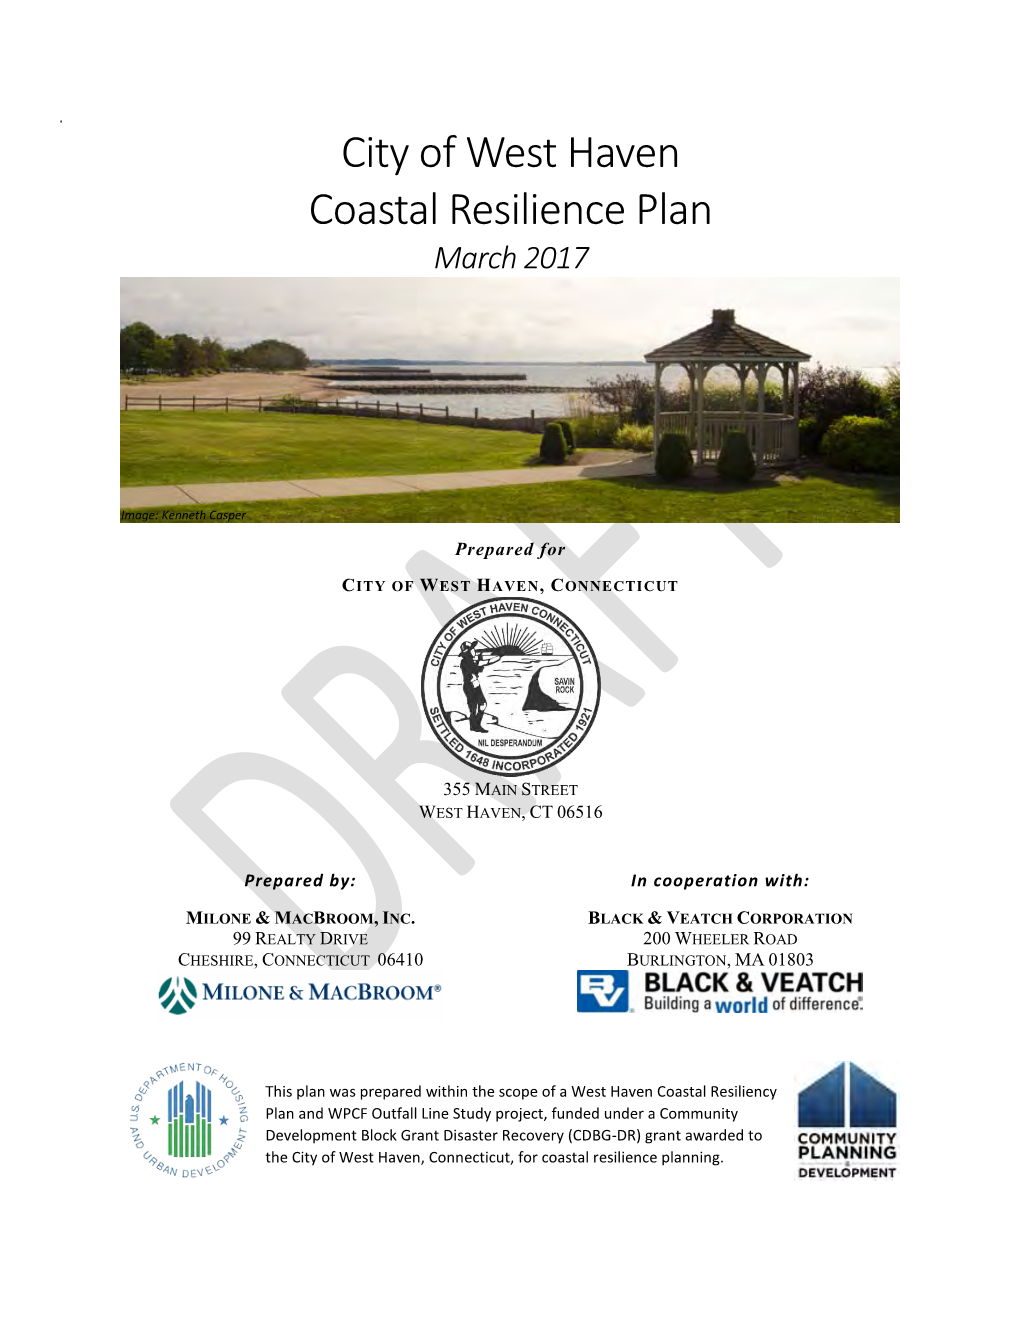 City of West Haven Coastal Resilience Plan March 2017